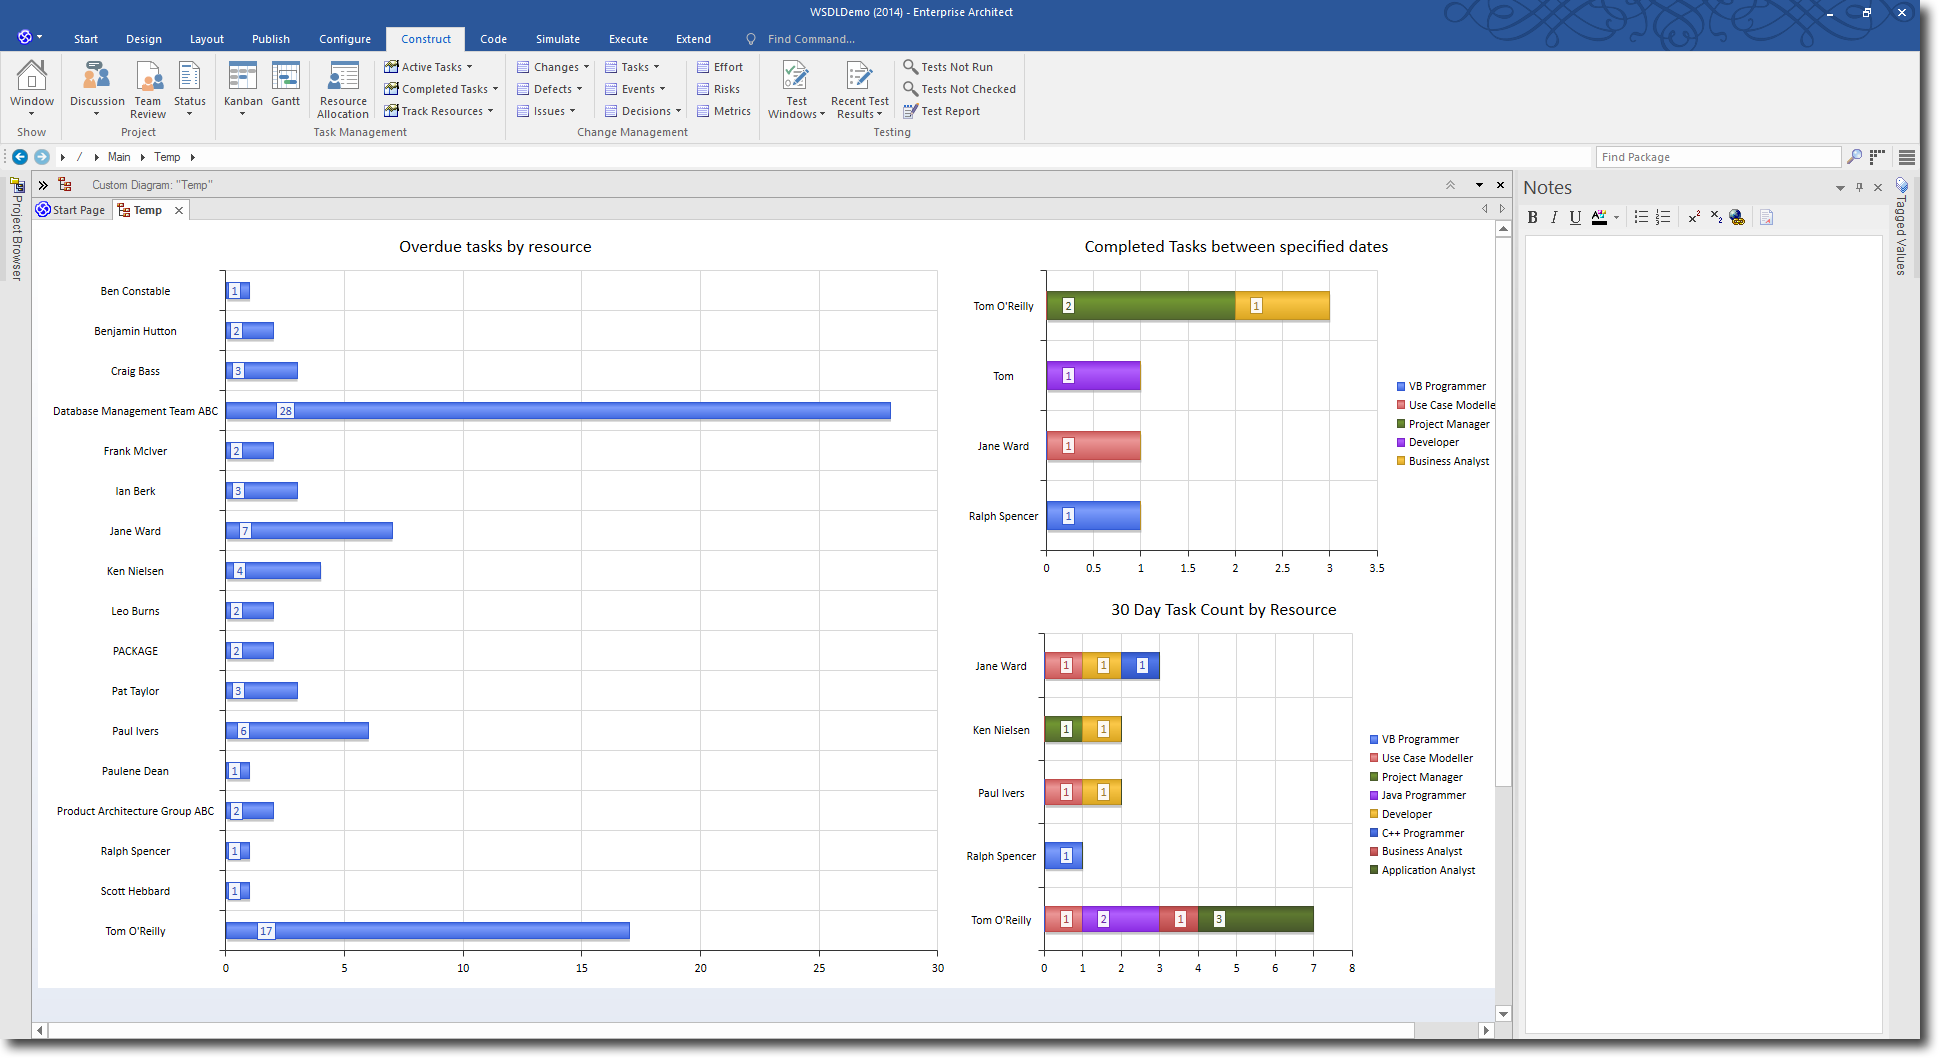 Enterprise Architect 13 Beta: Searches and Charts